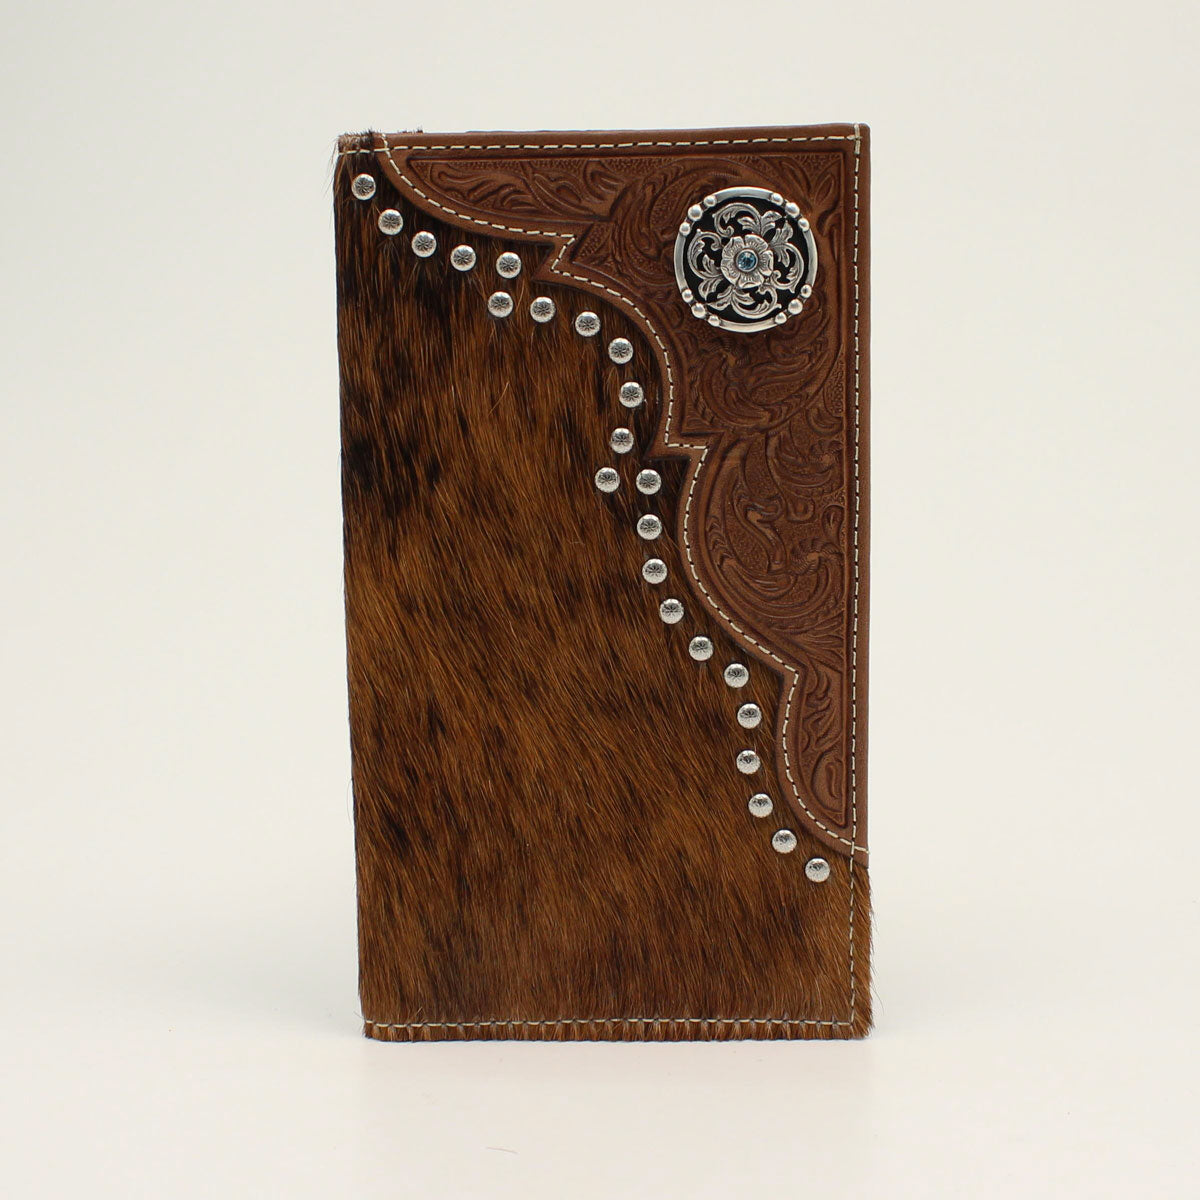 NOCONA CALF HAIR FLORAL TOOLED ROUND CONCHO BROWN WALLET